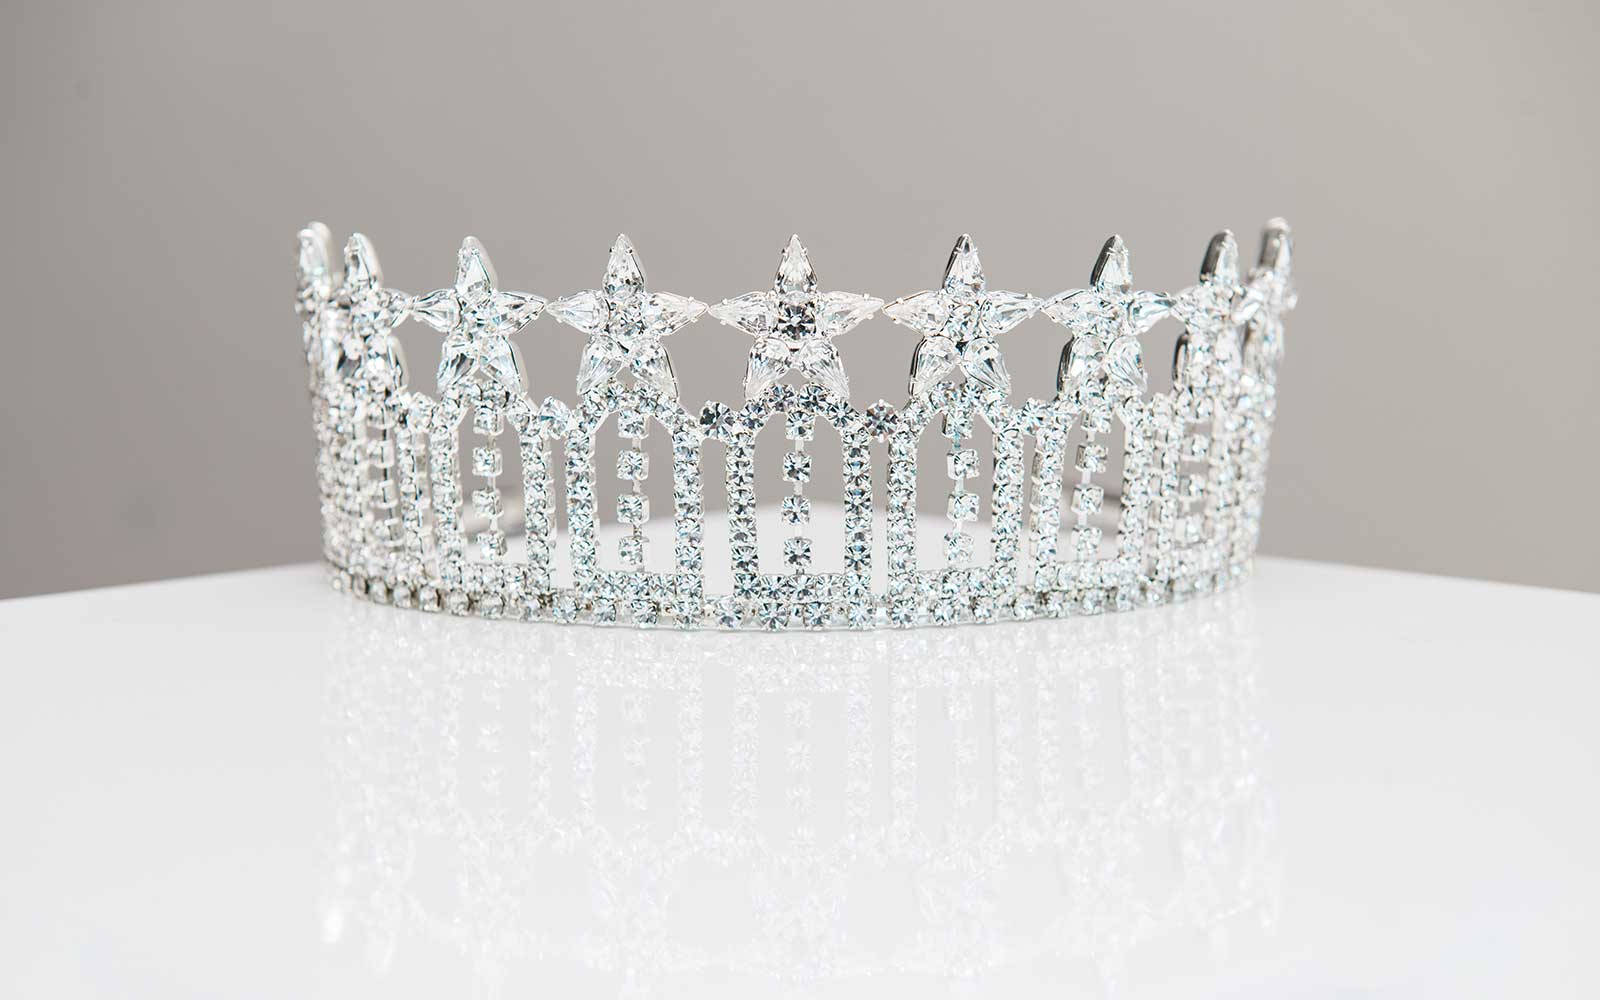 Captivating Elegance of the Miss USA State Crown Wallpaper